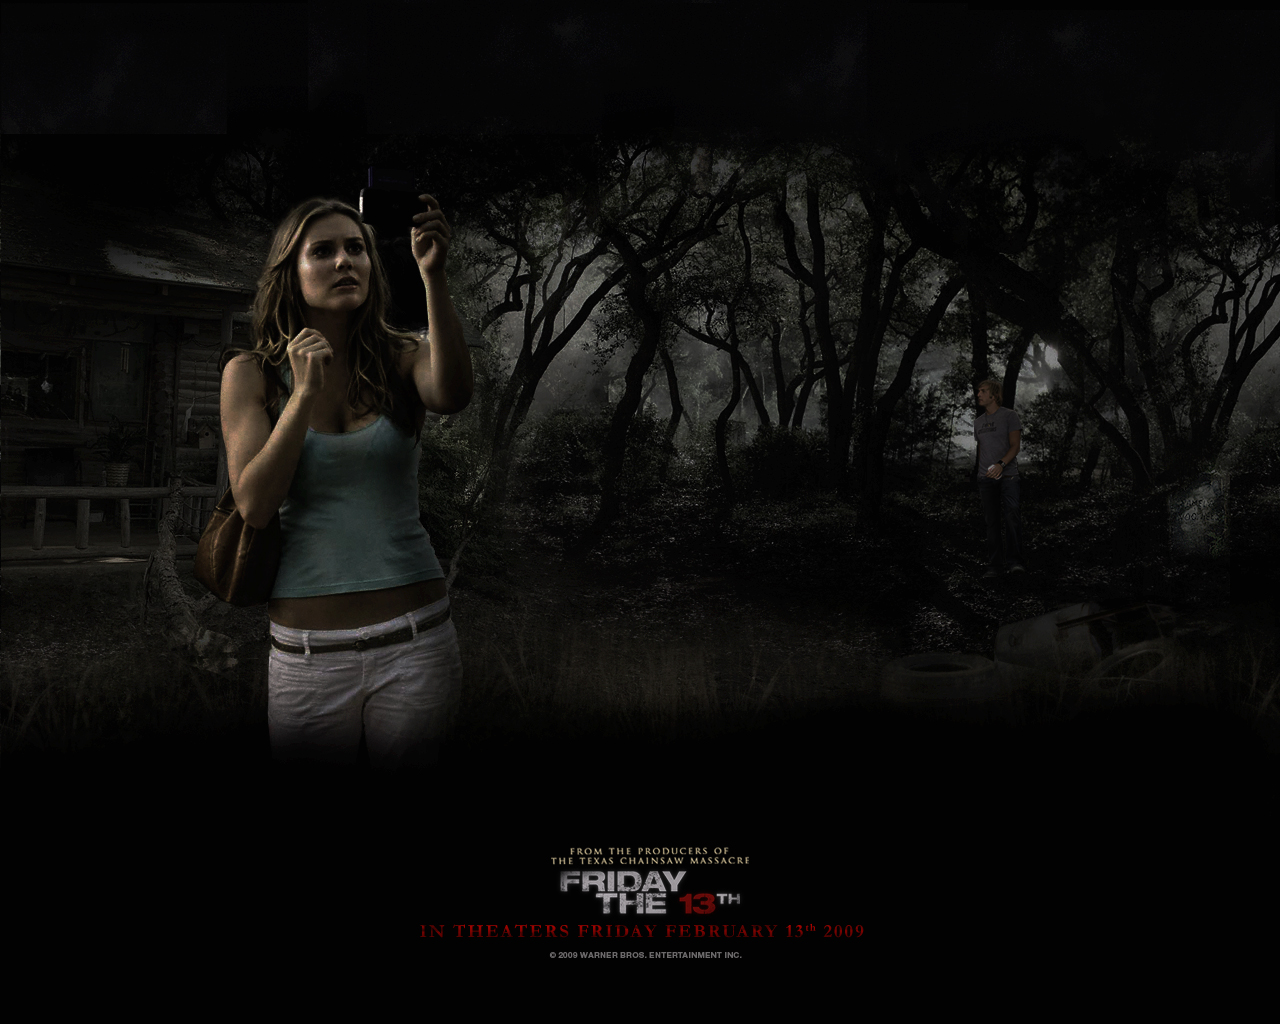 Download HQ Friday The 13th wallpaper / Movies / 1280x1024